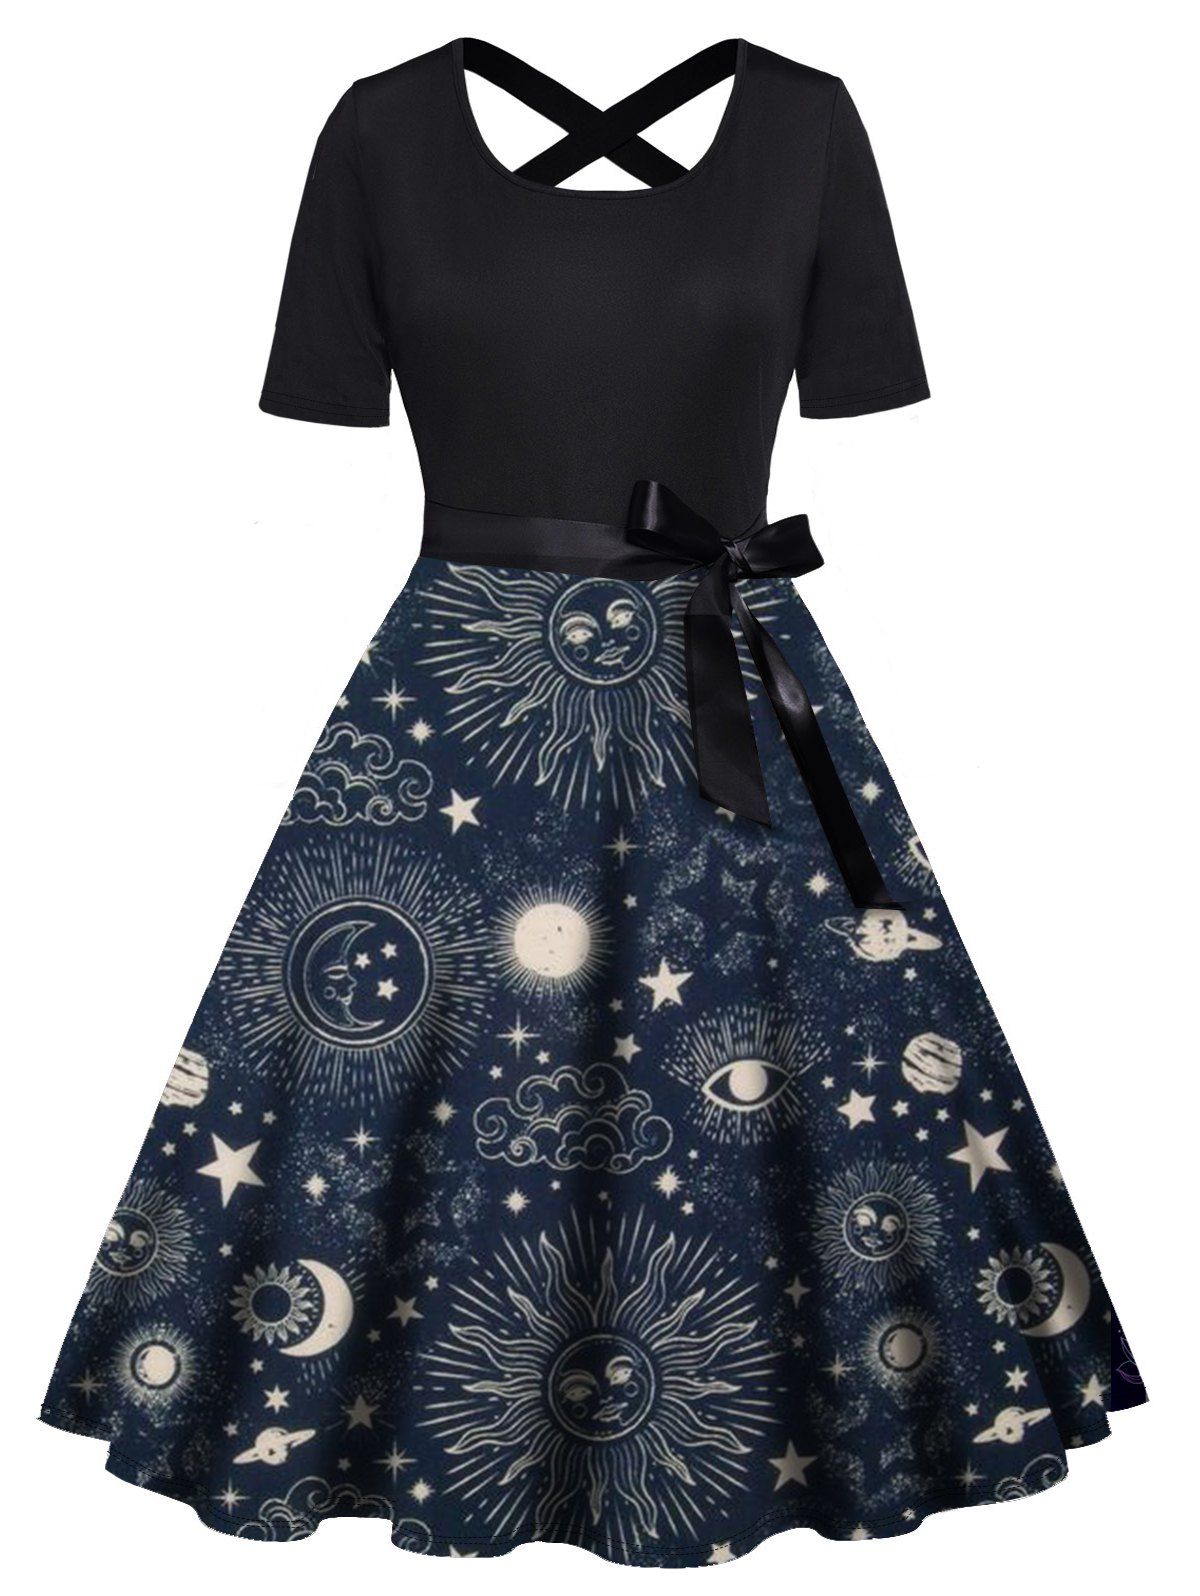 Plus Size Dress Sun Moon Star Planet Print Bowknot Belted Crossover Back High Waisted A Line Midi Dress - DEEP BLUE 3X